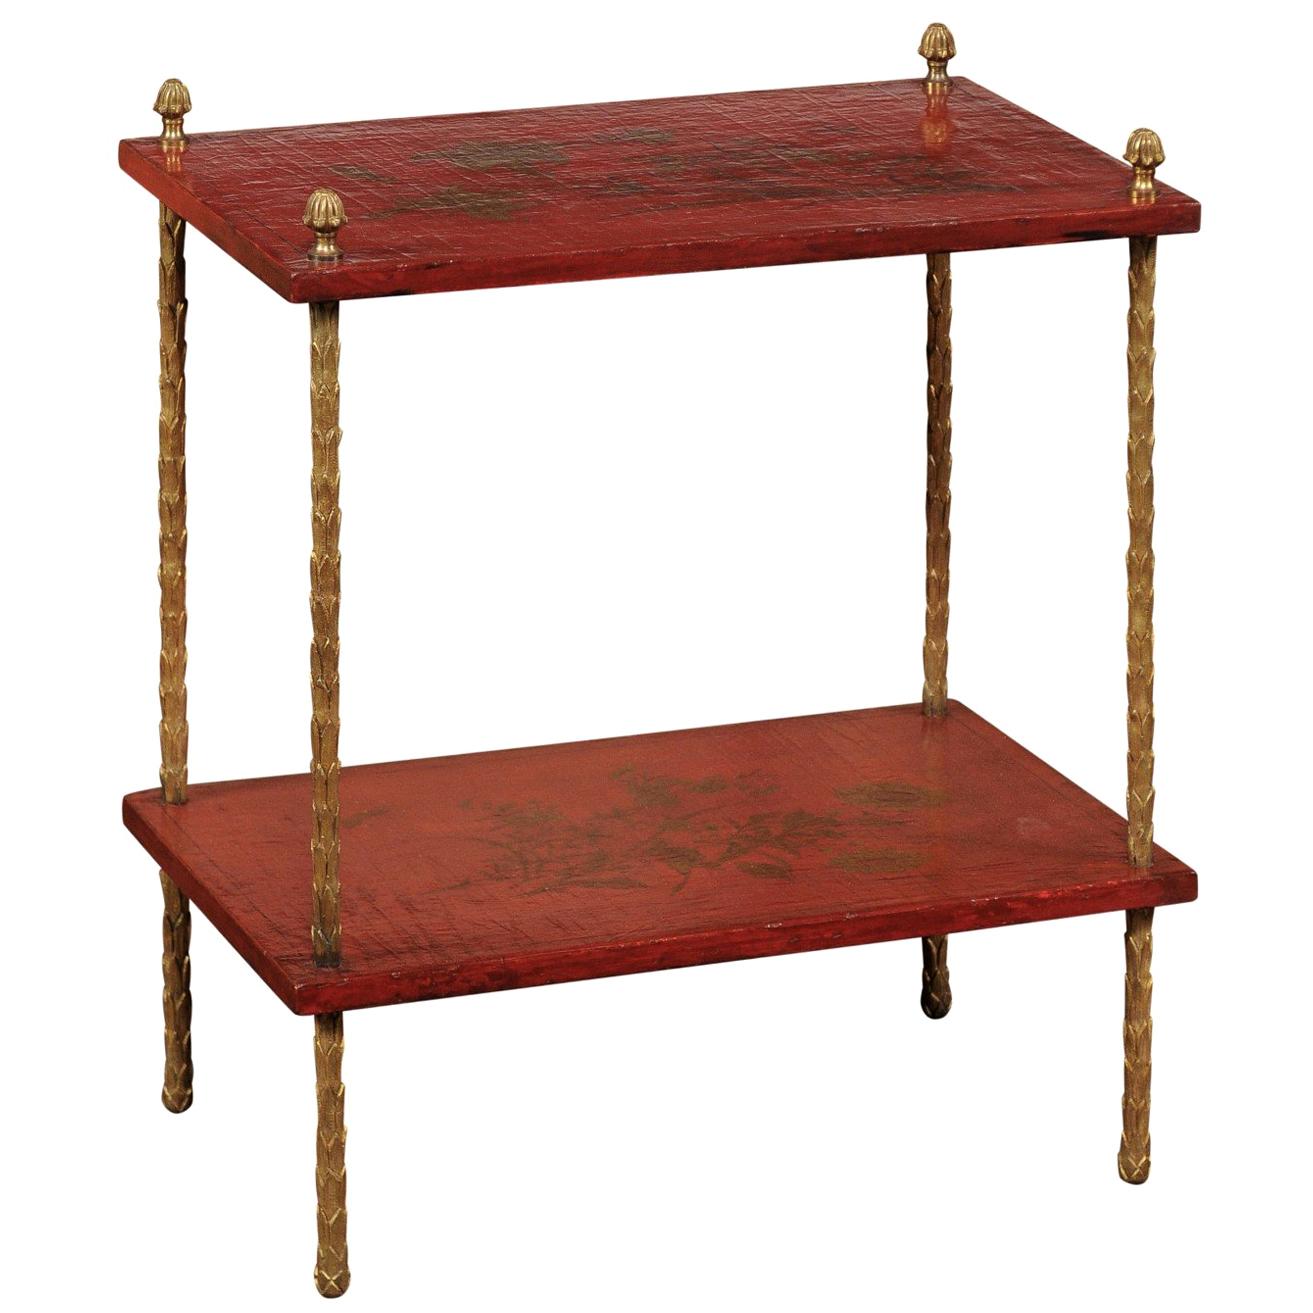 Maison Jansen Style Midcentury Tiered Side Table with Red Chinoiserie Décor